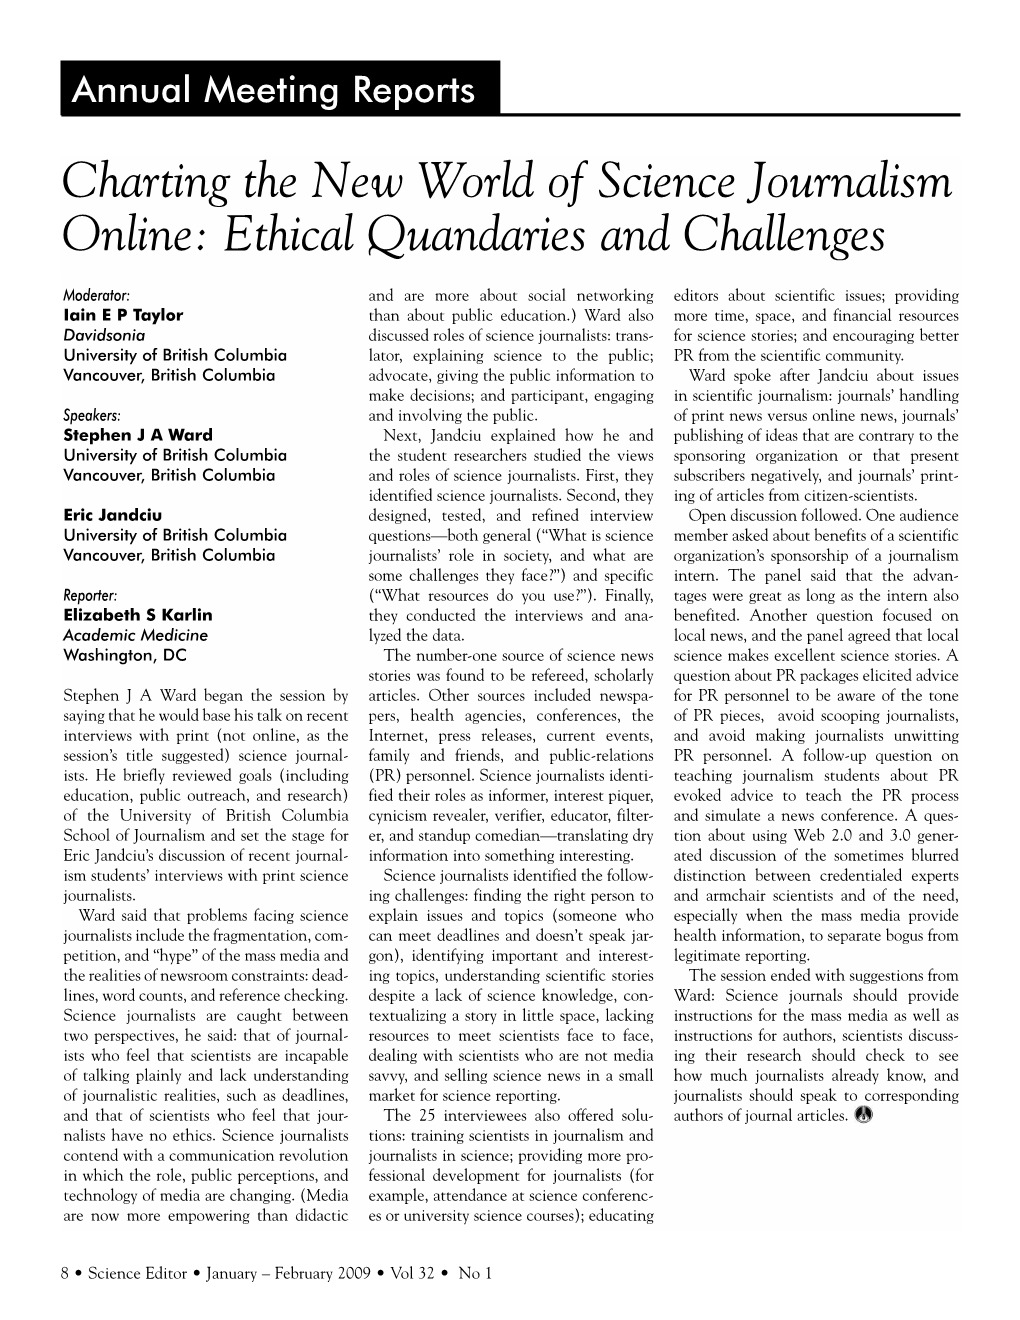 Charting the New World of Science Journalism Online: Ethical Quandaries and Challenges